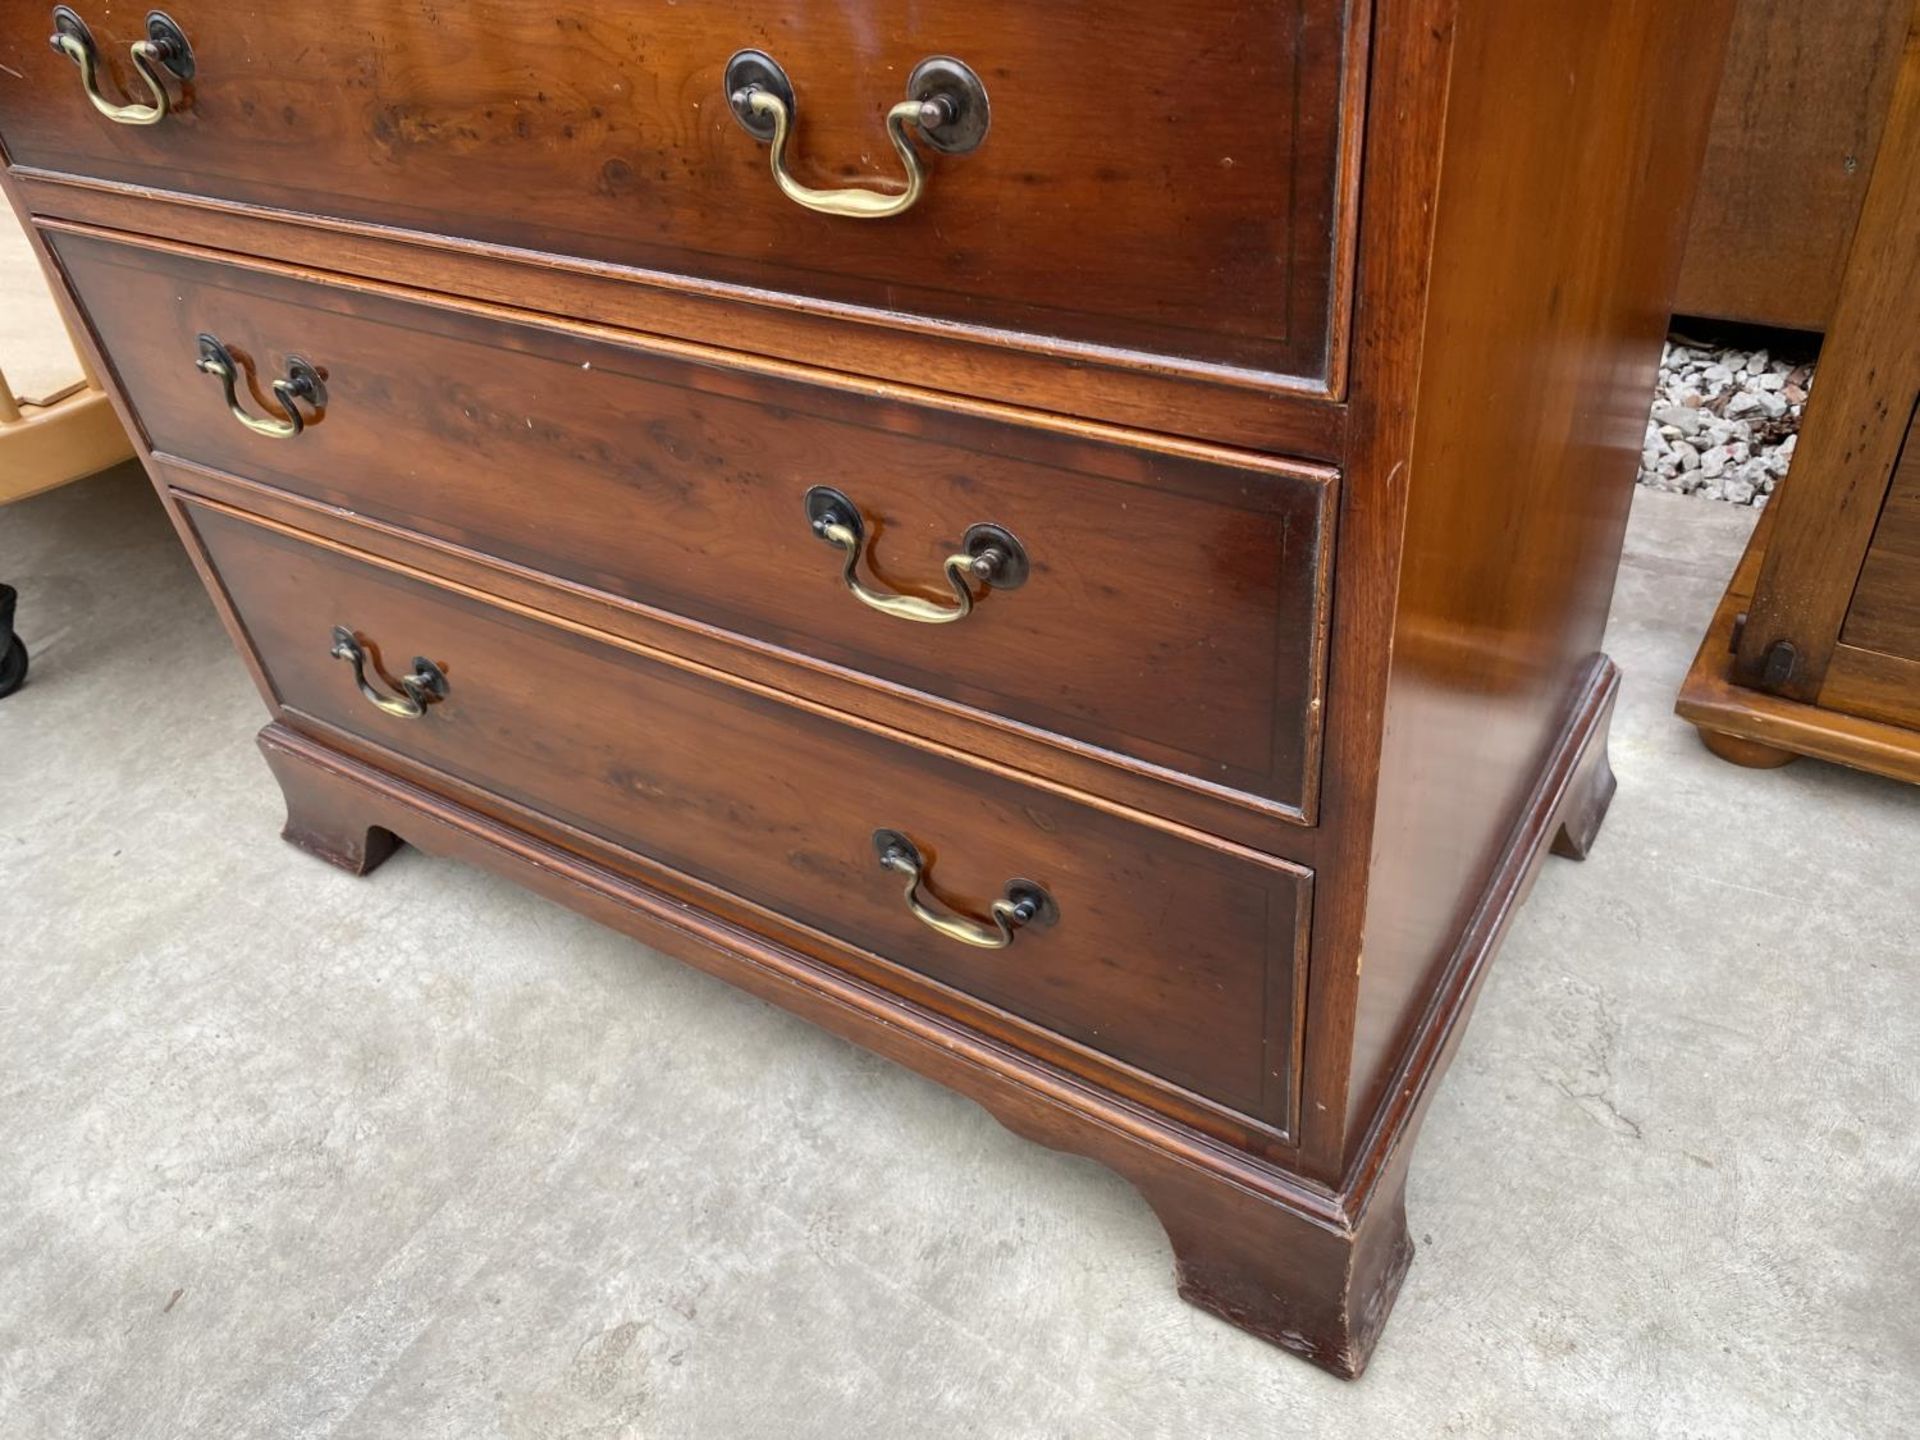 A YEW WOOD AND CROSSBANDED CHEST OF THREE DRAWERS, 30" WIDE - Image 3 of 4